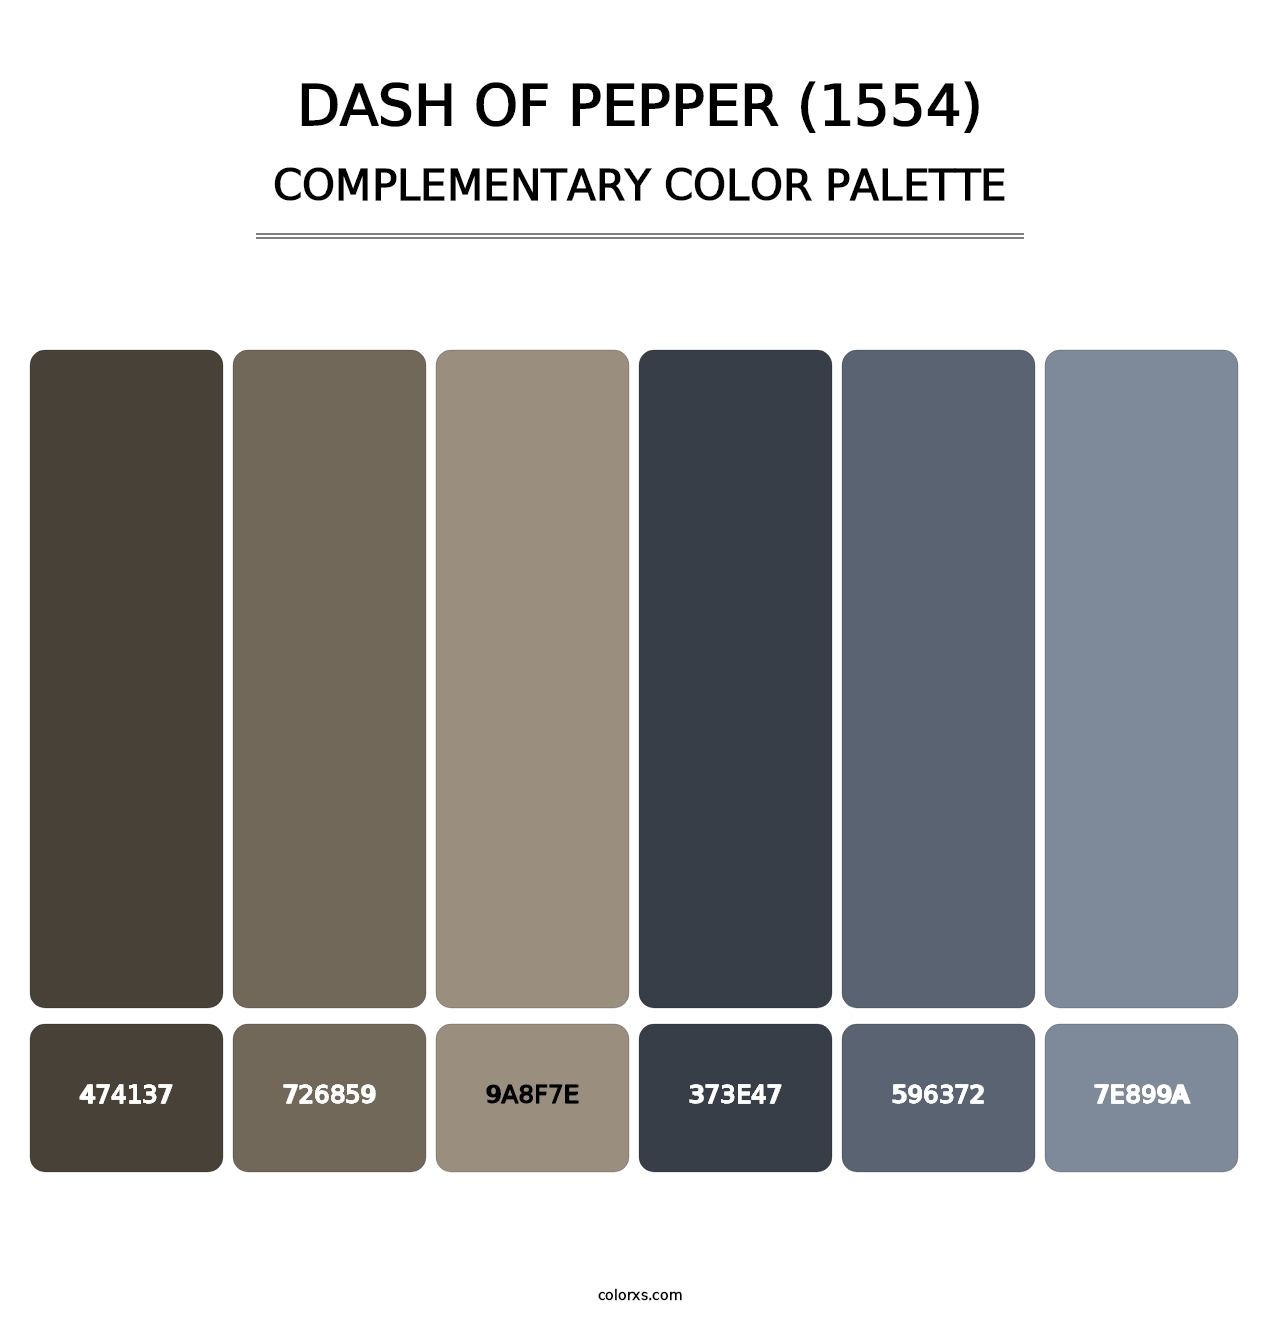 Dash of Pepper (1554) - Complementary Color Palette